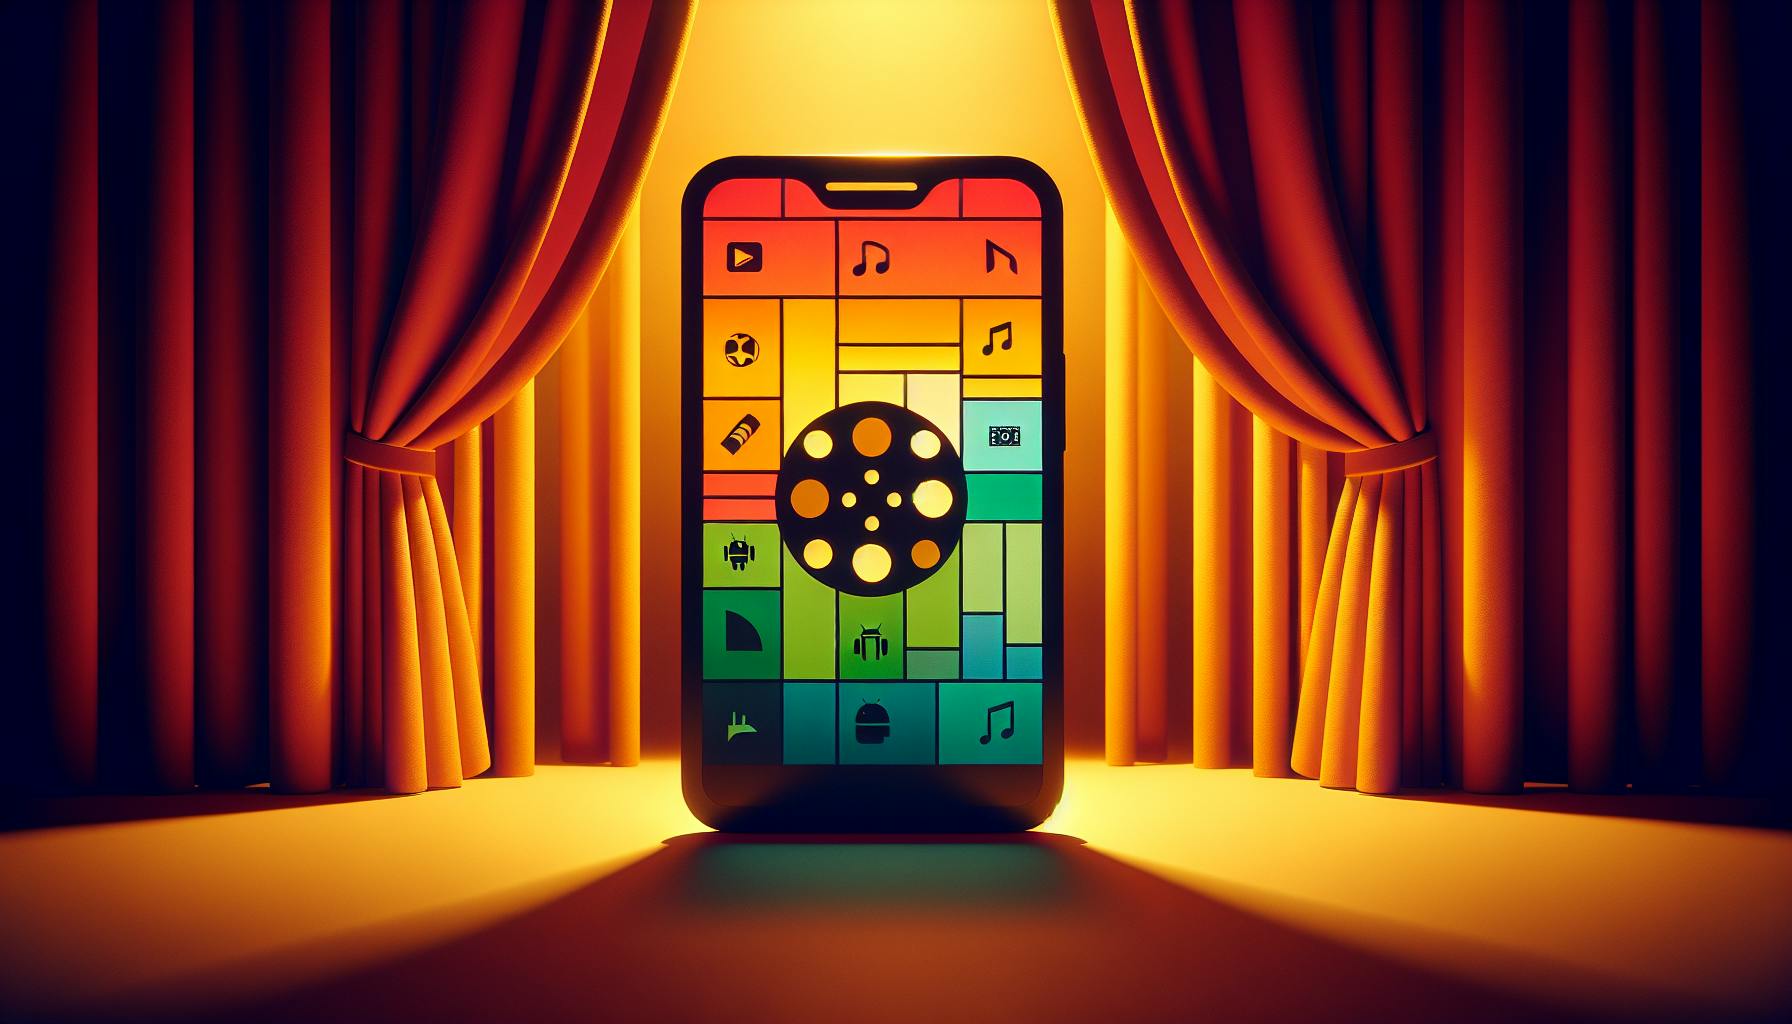 Cinema App on Android Phone: Integration Tips